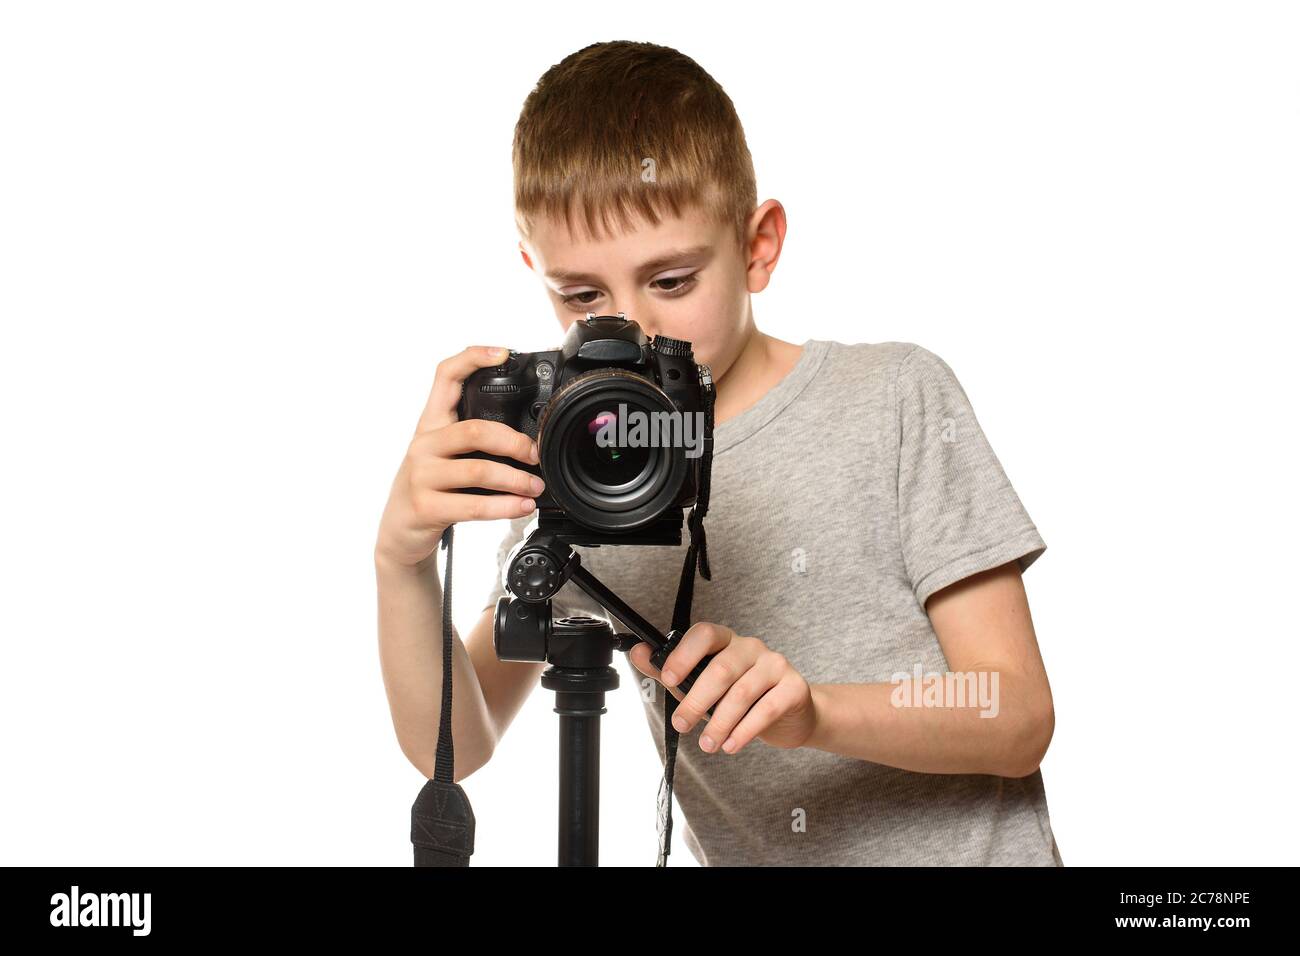 Schoolboy shoots video on DSLR camera. Front view. White background, isolate Stock Photo